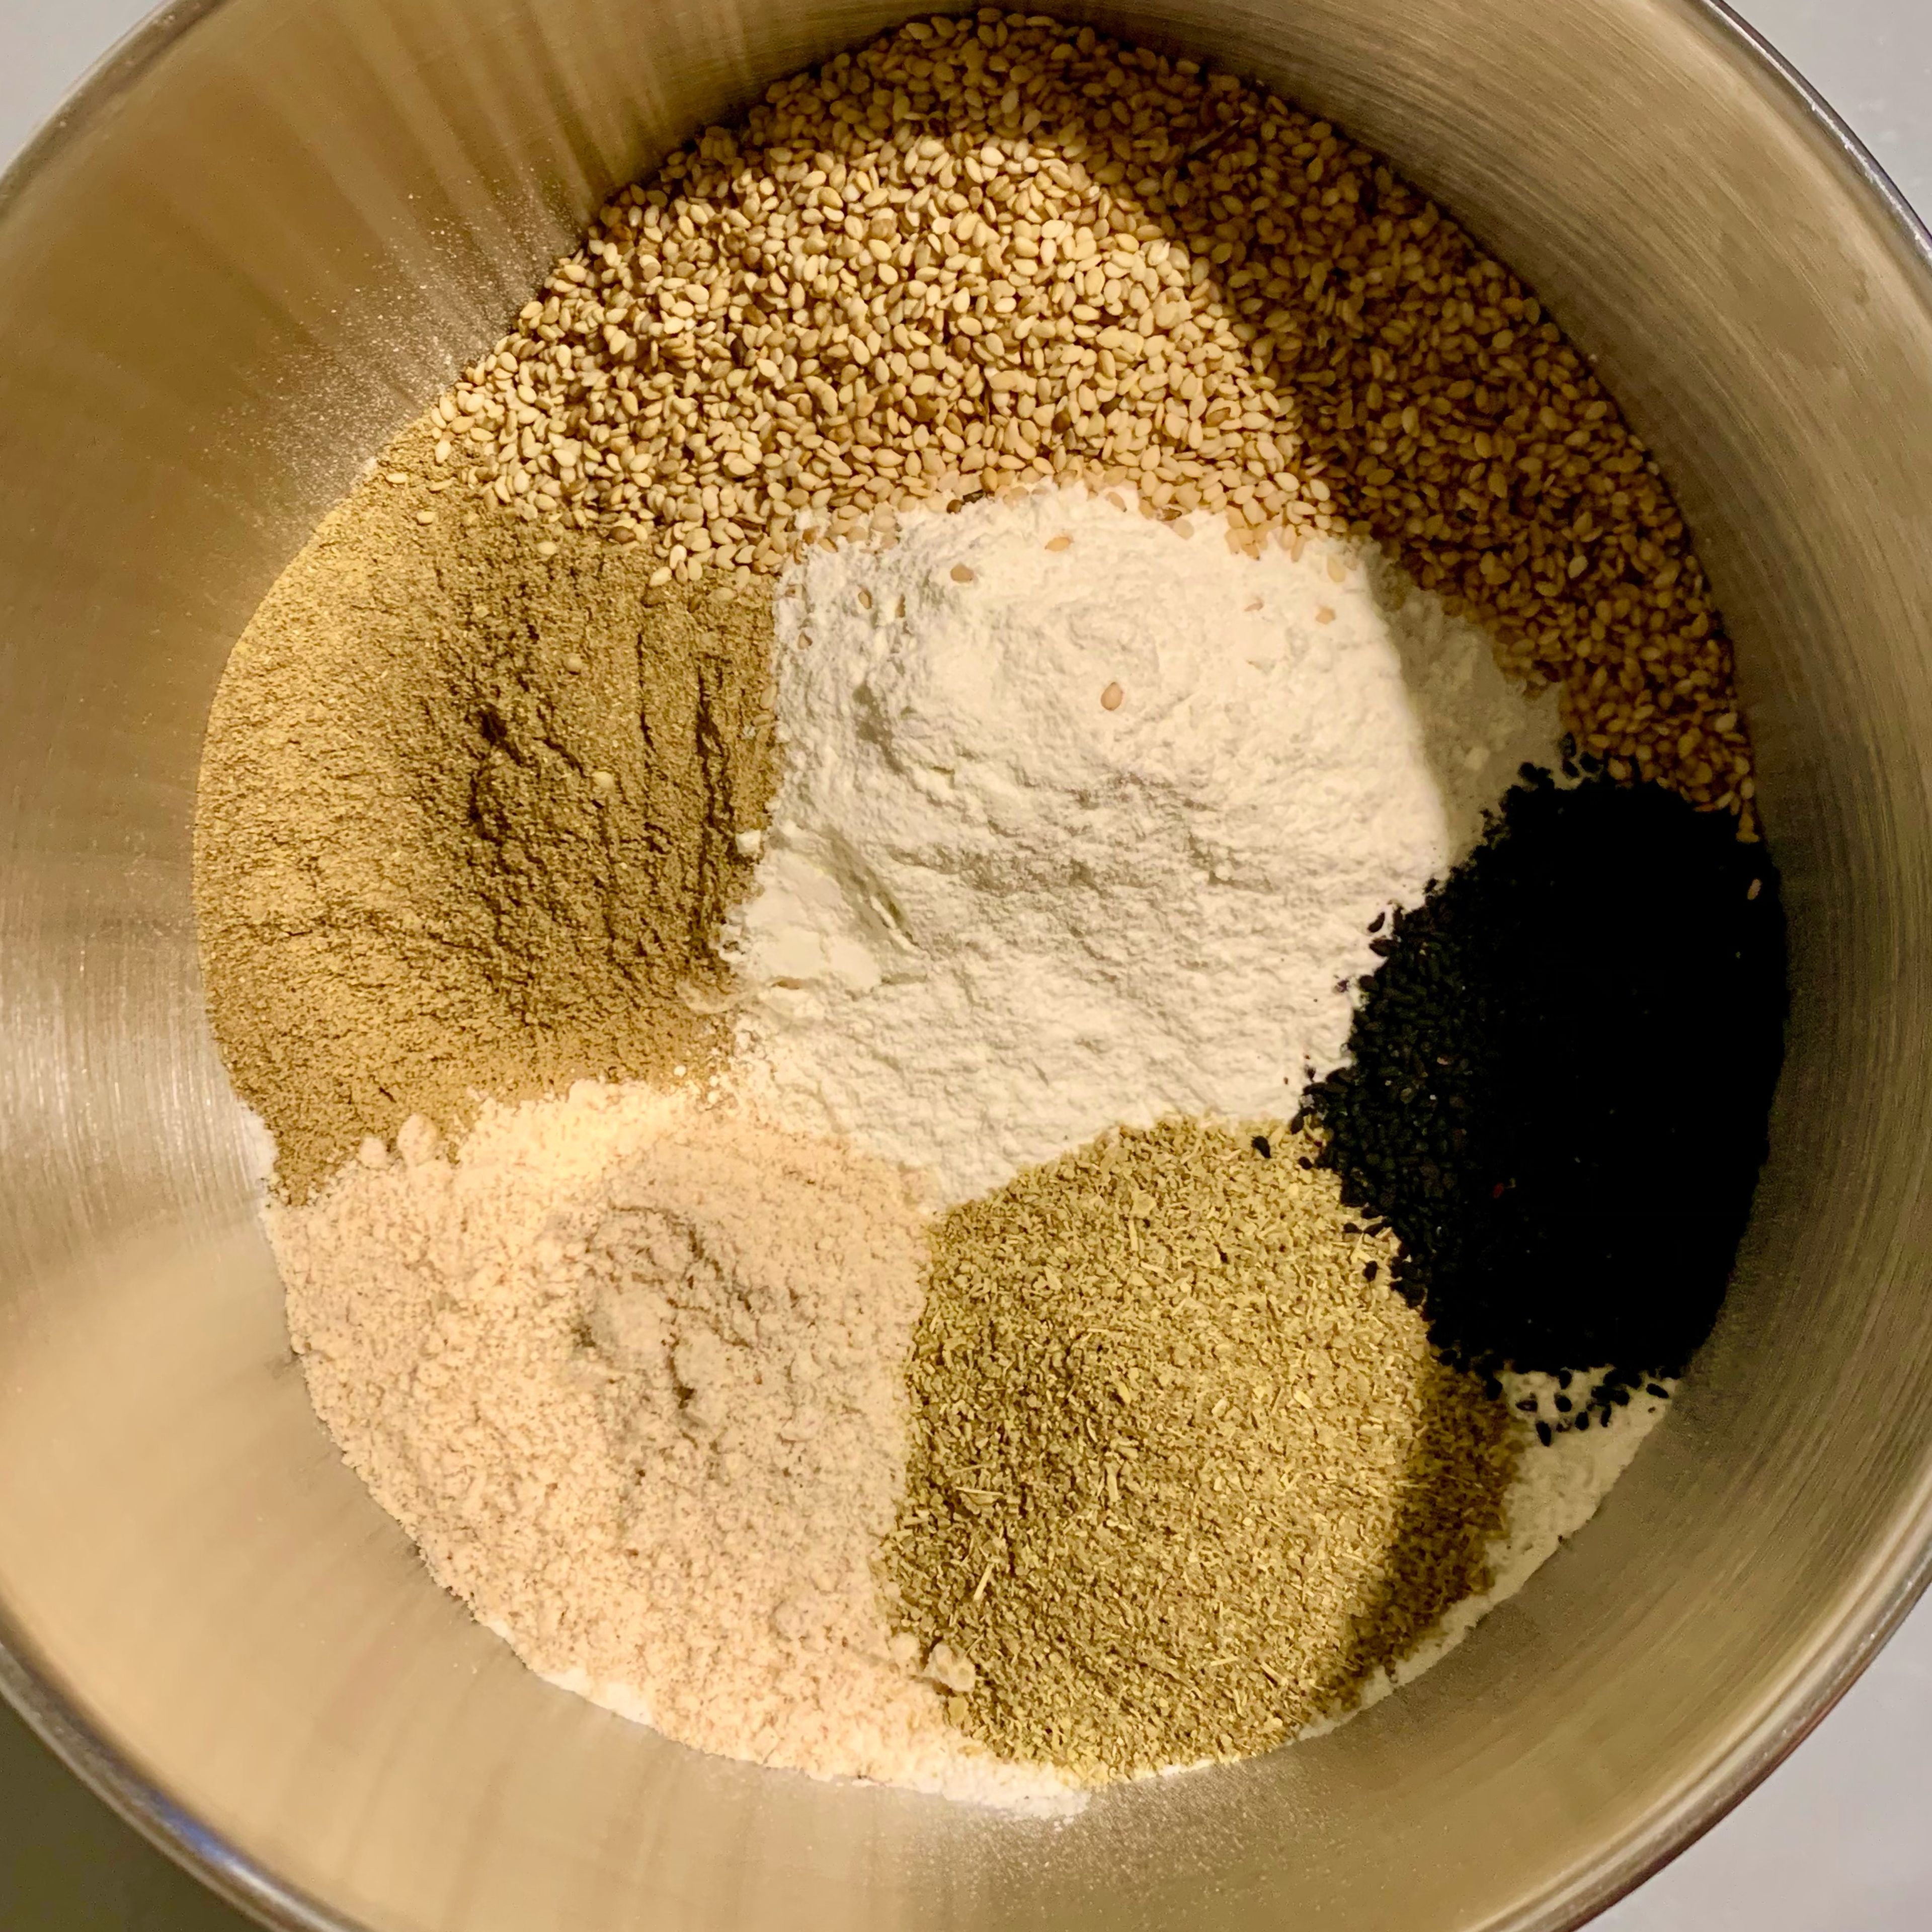 Mix all the dry ingredients together except the sugar and yeast.